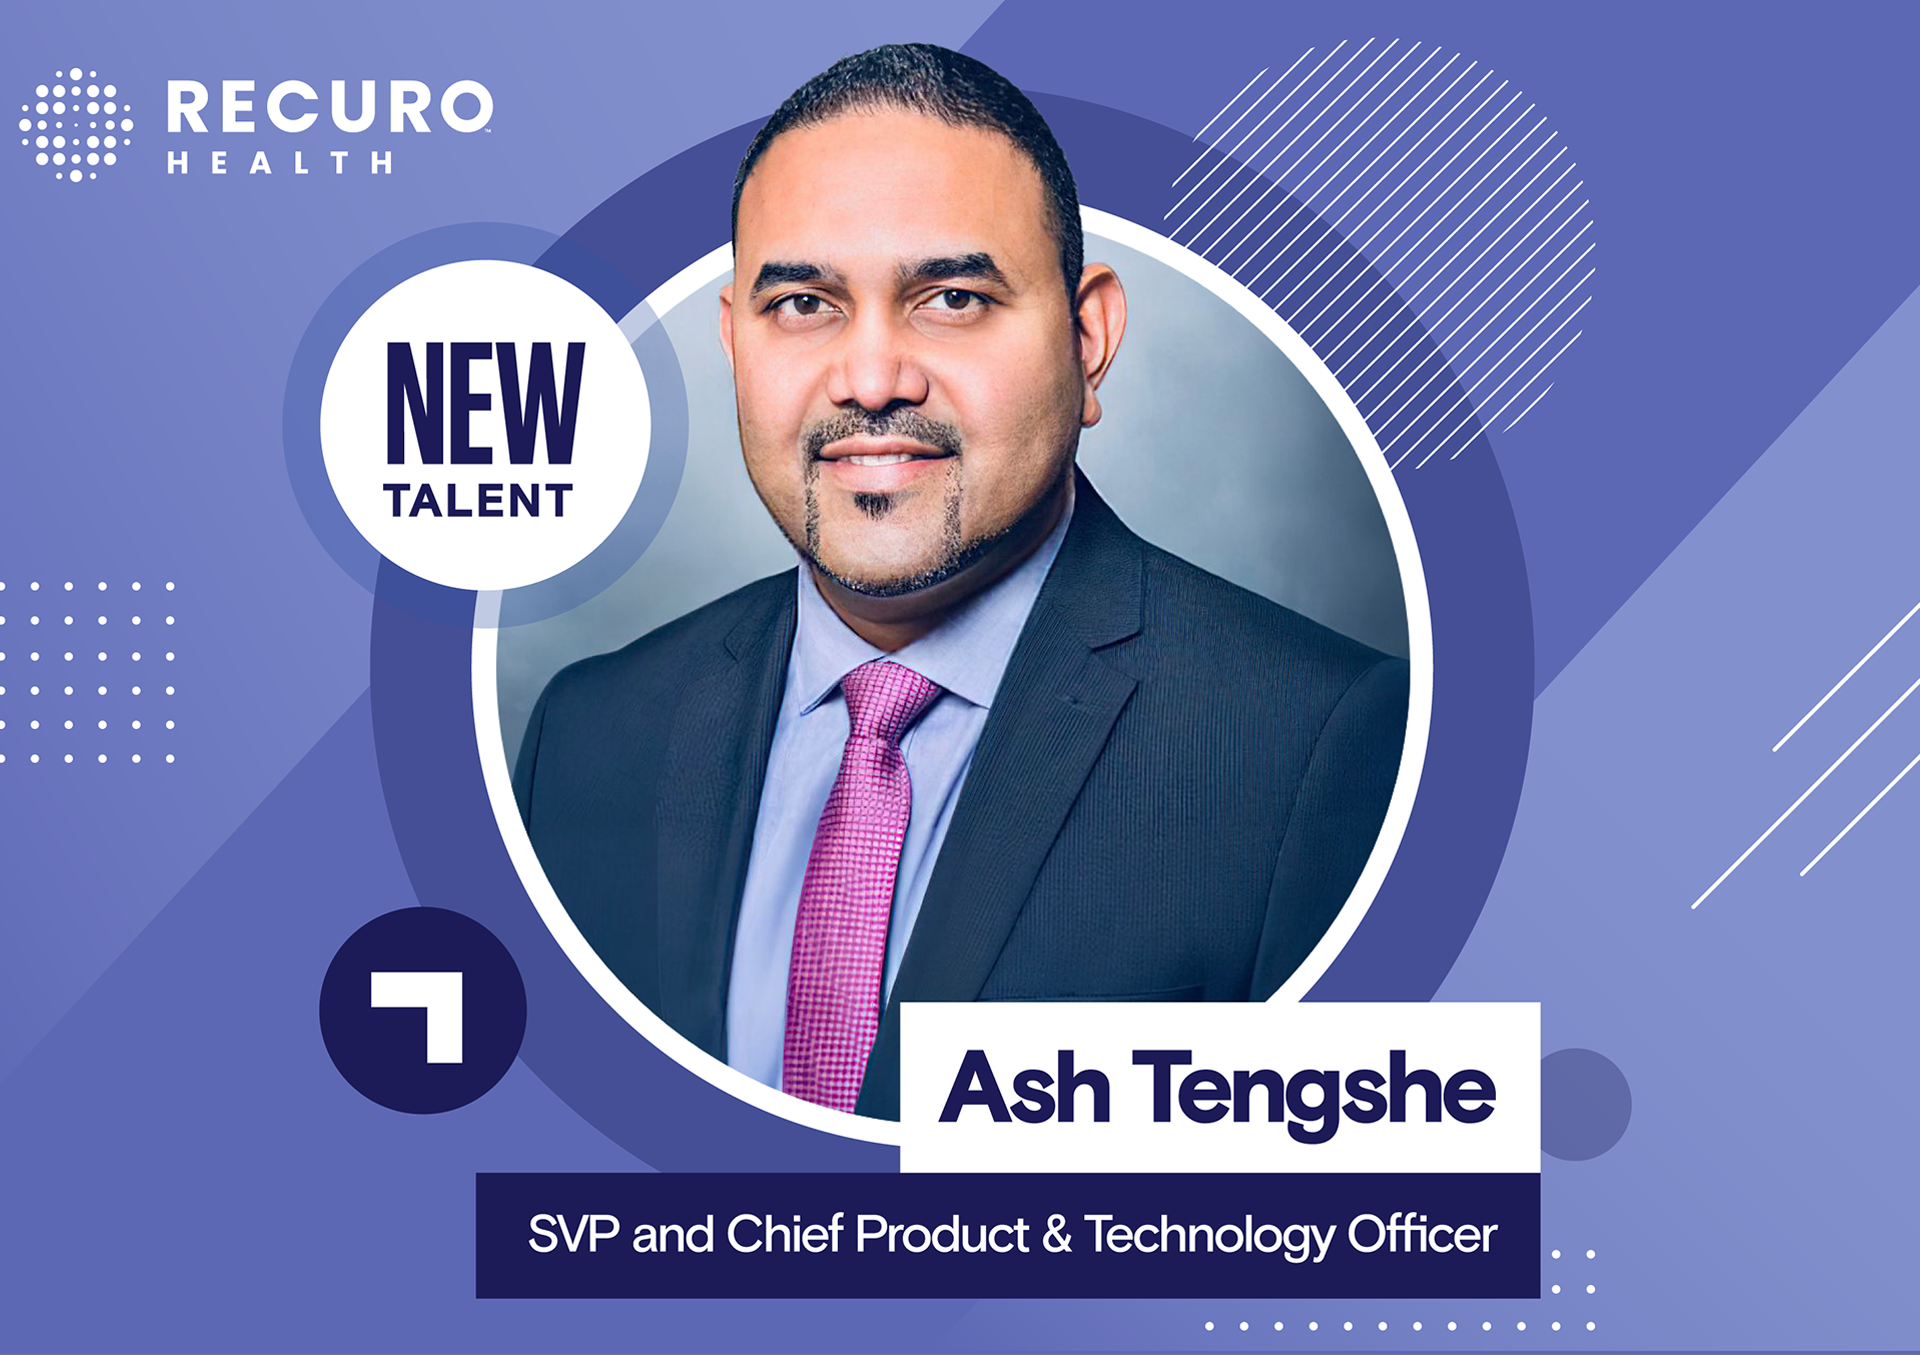 Ash Tengshe Appointed Senior Vice President and Chief Product Technology Officer at Recuro Health to Lead Innovative Product Development